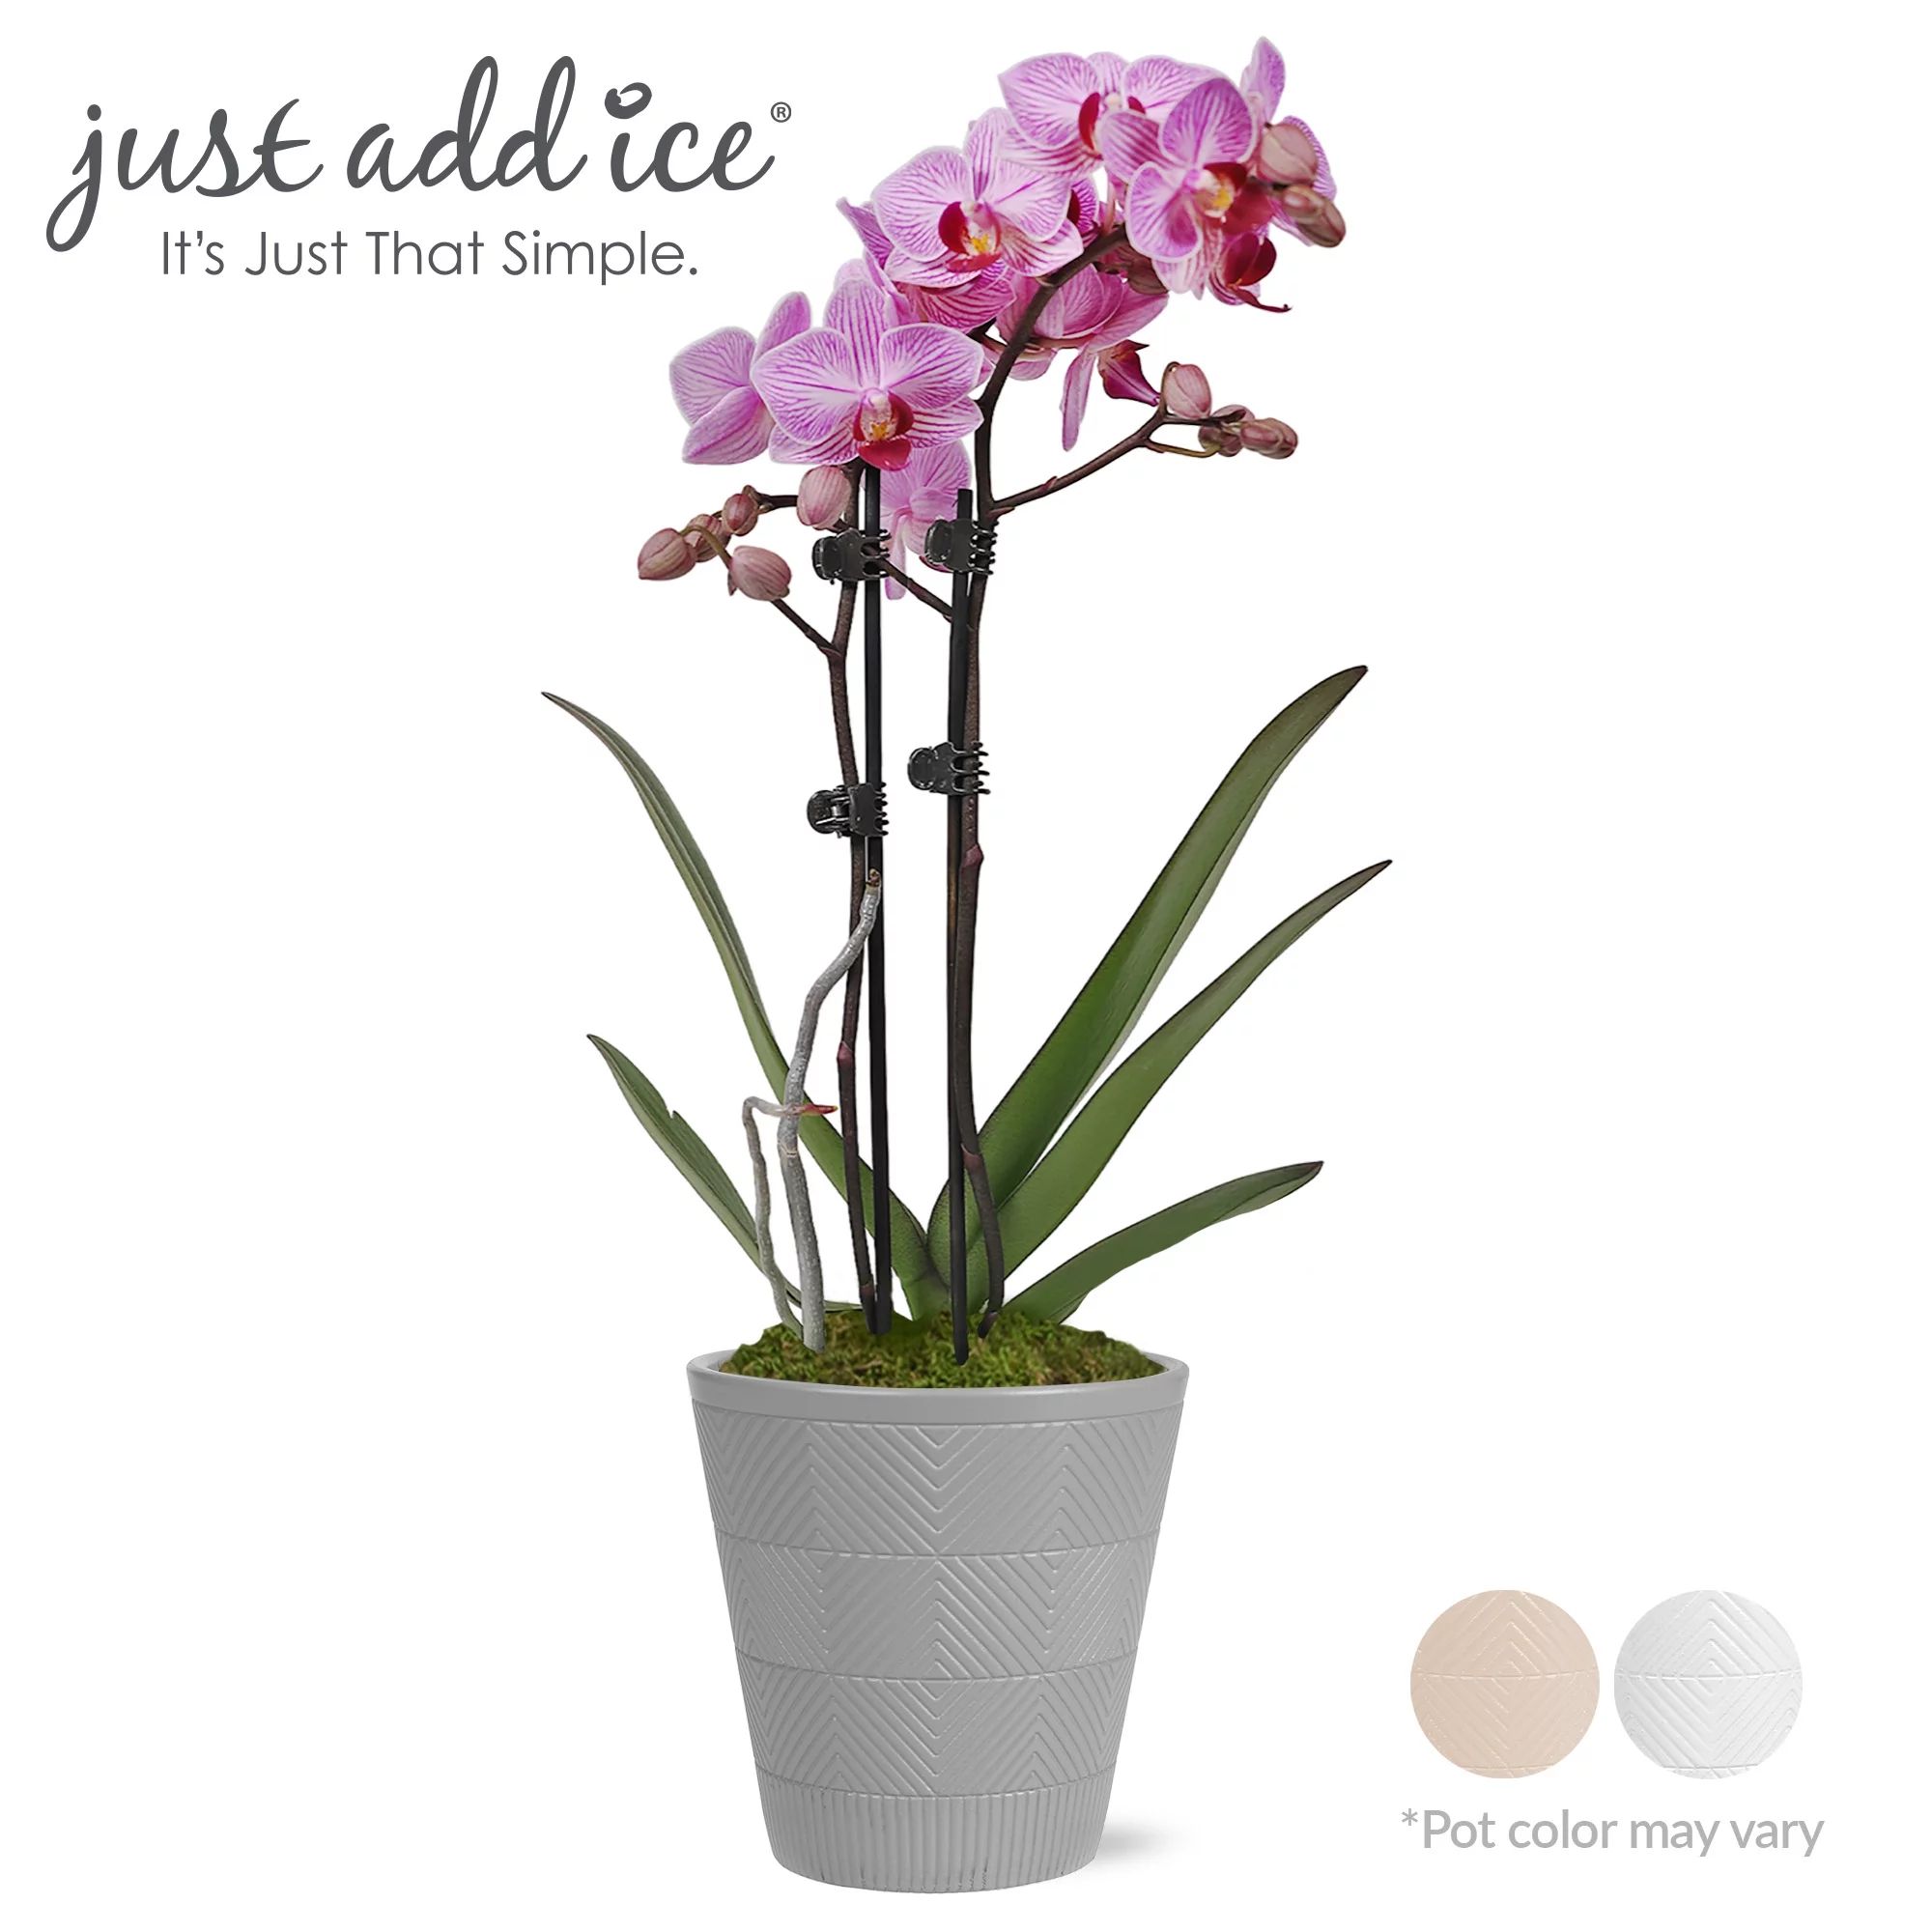 Just Add Ice Live Plant 15-20" Tall Petite Pink Purple Orchid in 3" Decorative Clay Pot | Walmart (US)